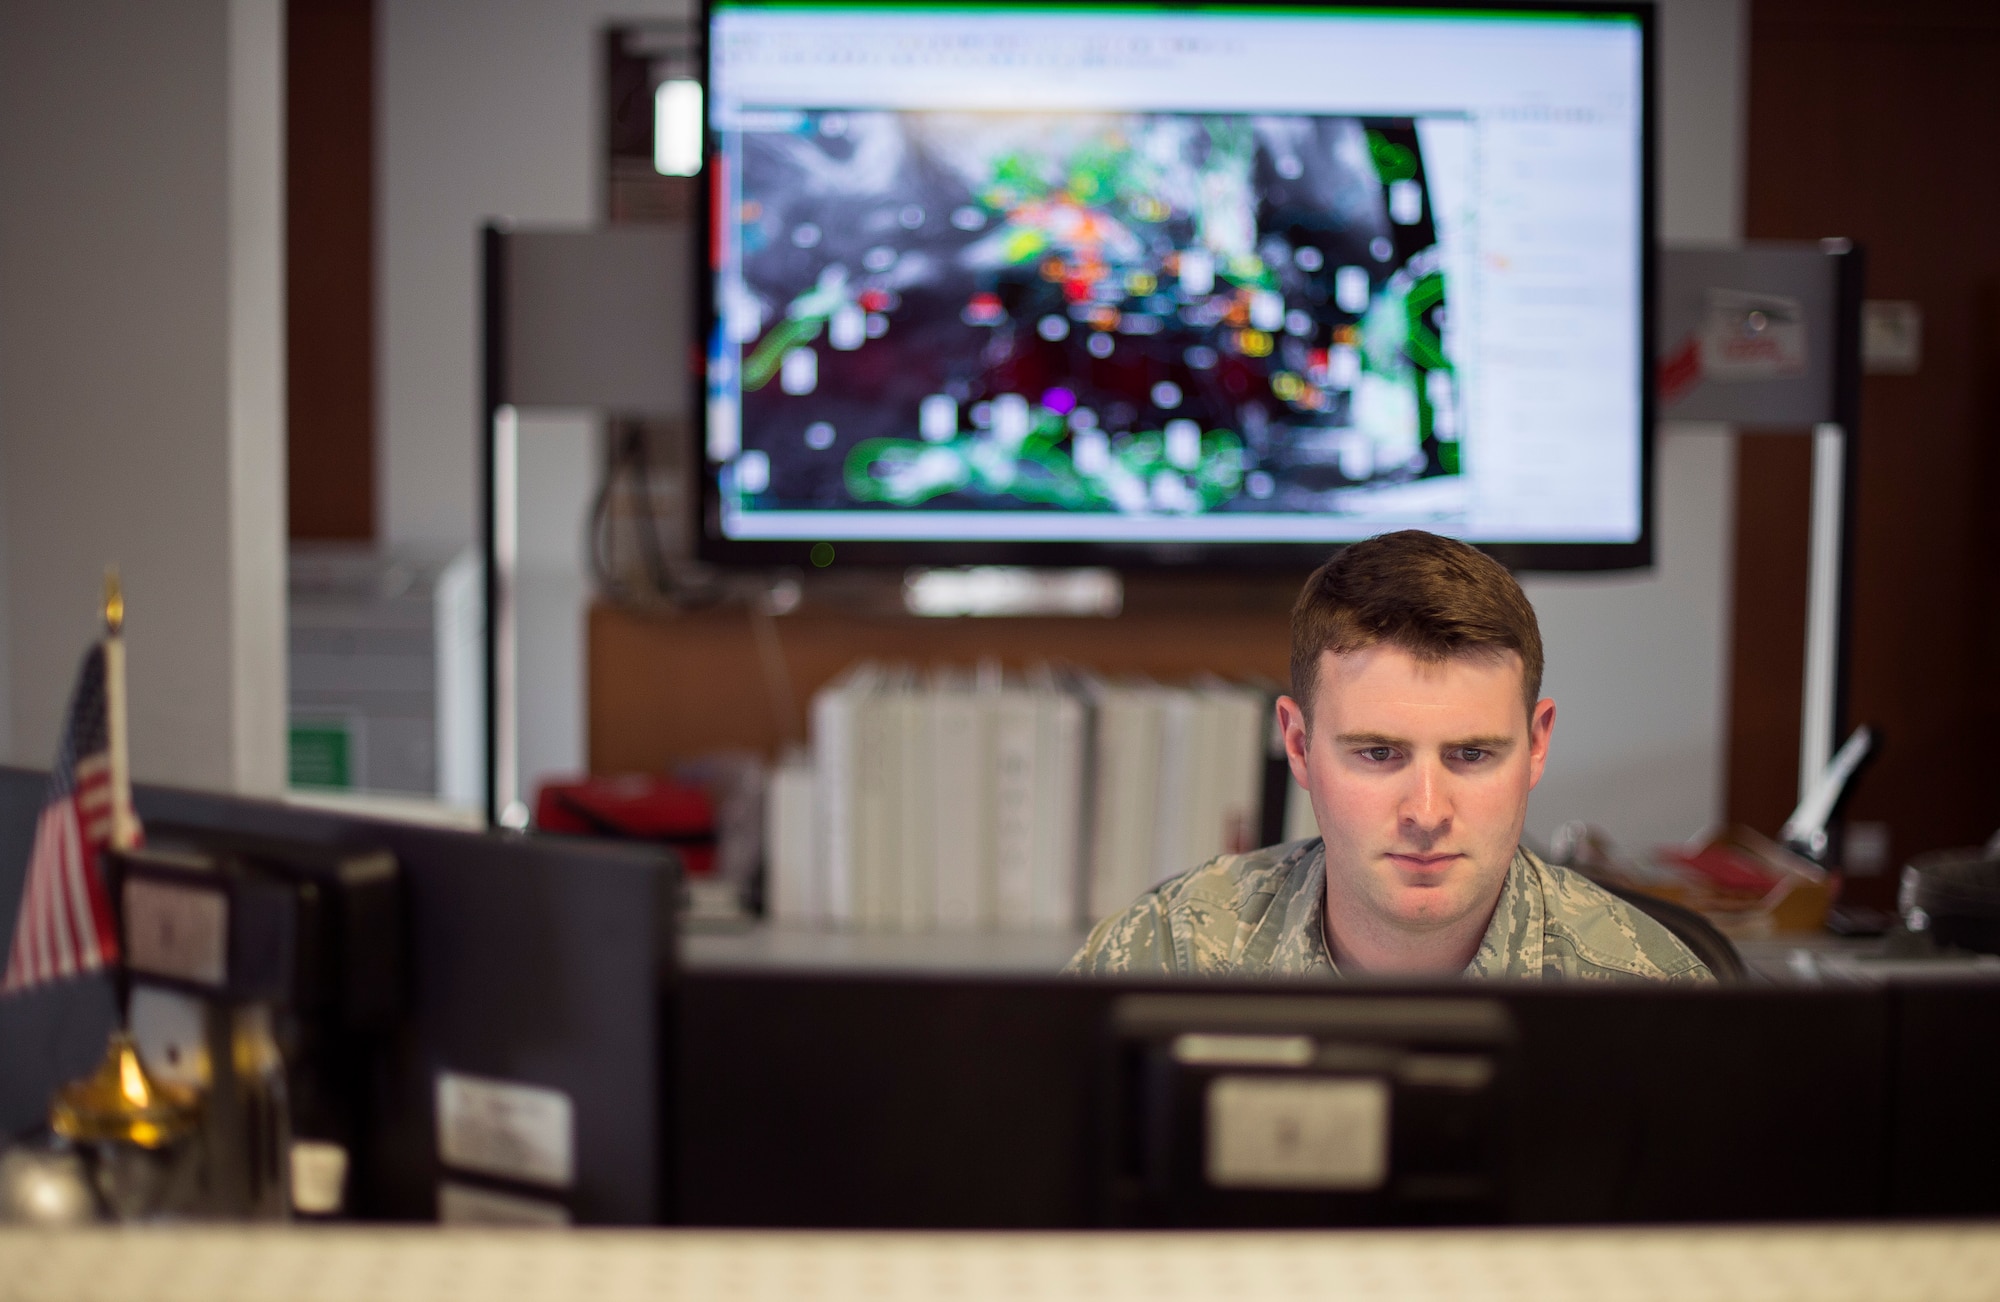 U.S. Air Force Staff Sgt. Trevor Reiss, 21st Operational Weather Squadron weather journeyman, works on a weather forecast July 28 at Kapaun Air Base, Germany. Reiss was selected as the 2014 Air Force Weather Airman of the Year. (U.S. Air Force photo by Senior Airman Damon Kasberg)